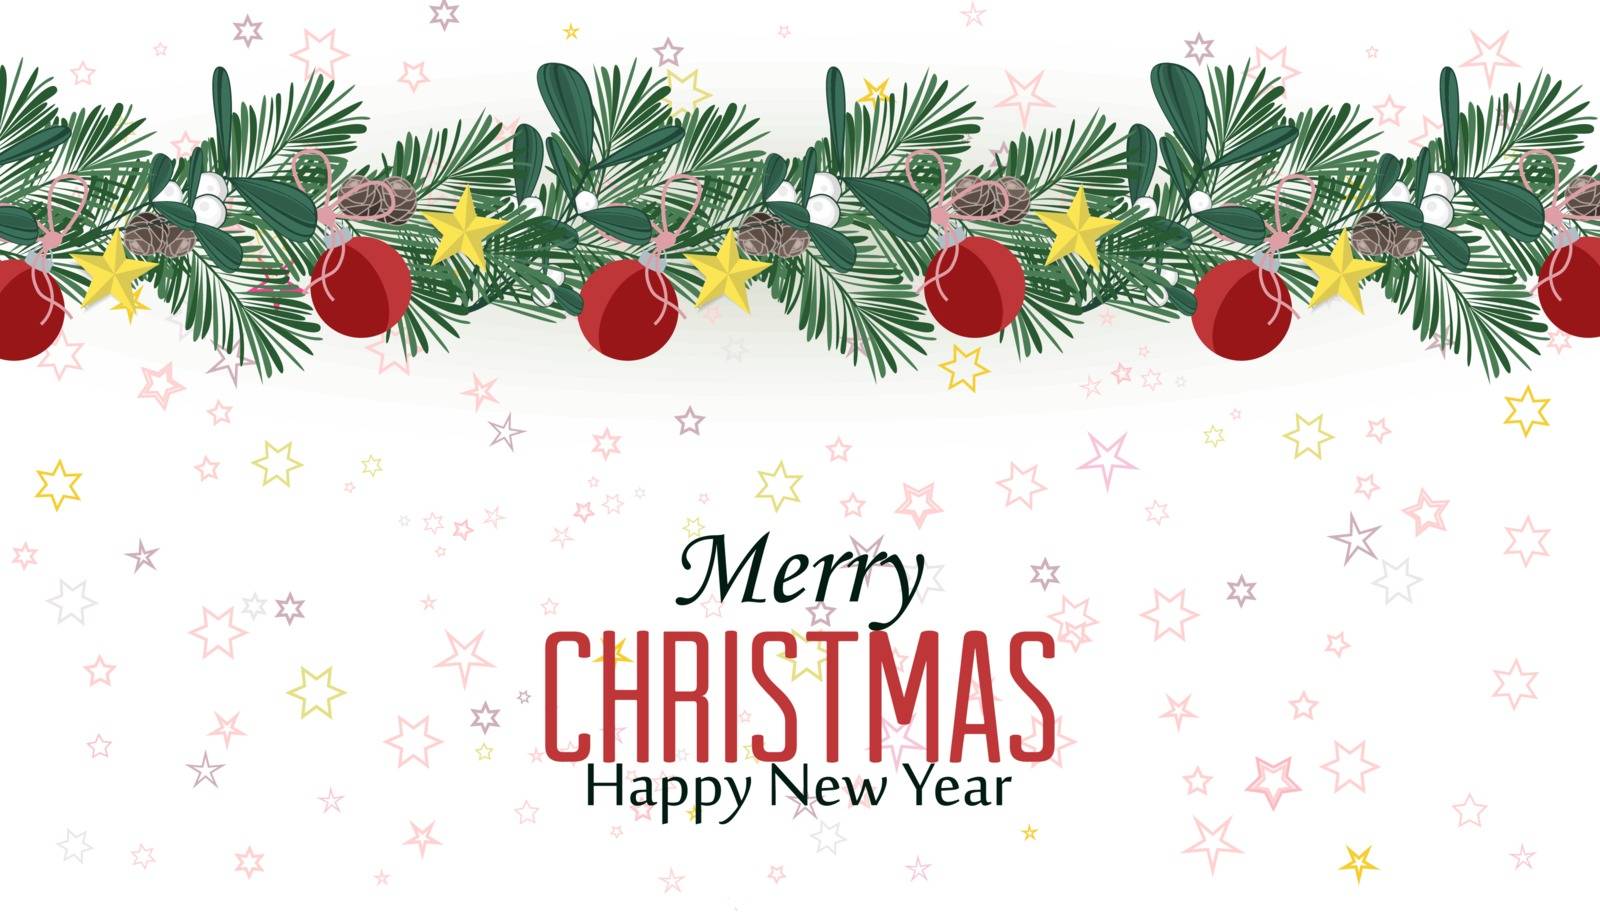 Vector illustration Christmas decorative branches with ornaments. Happy Christmas greeting card